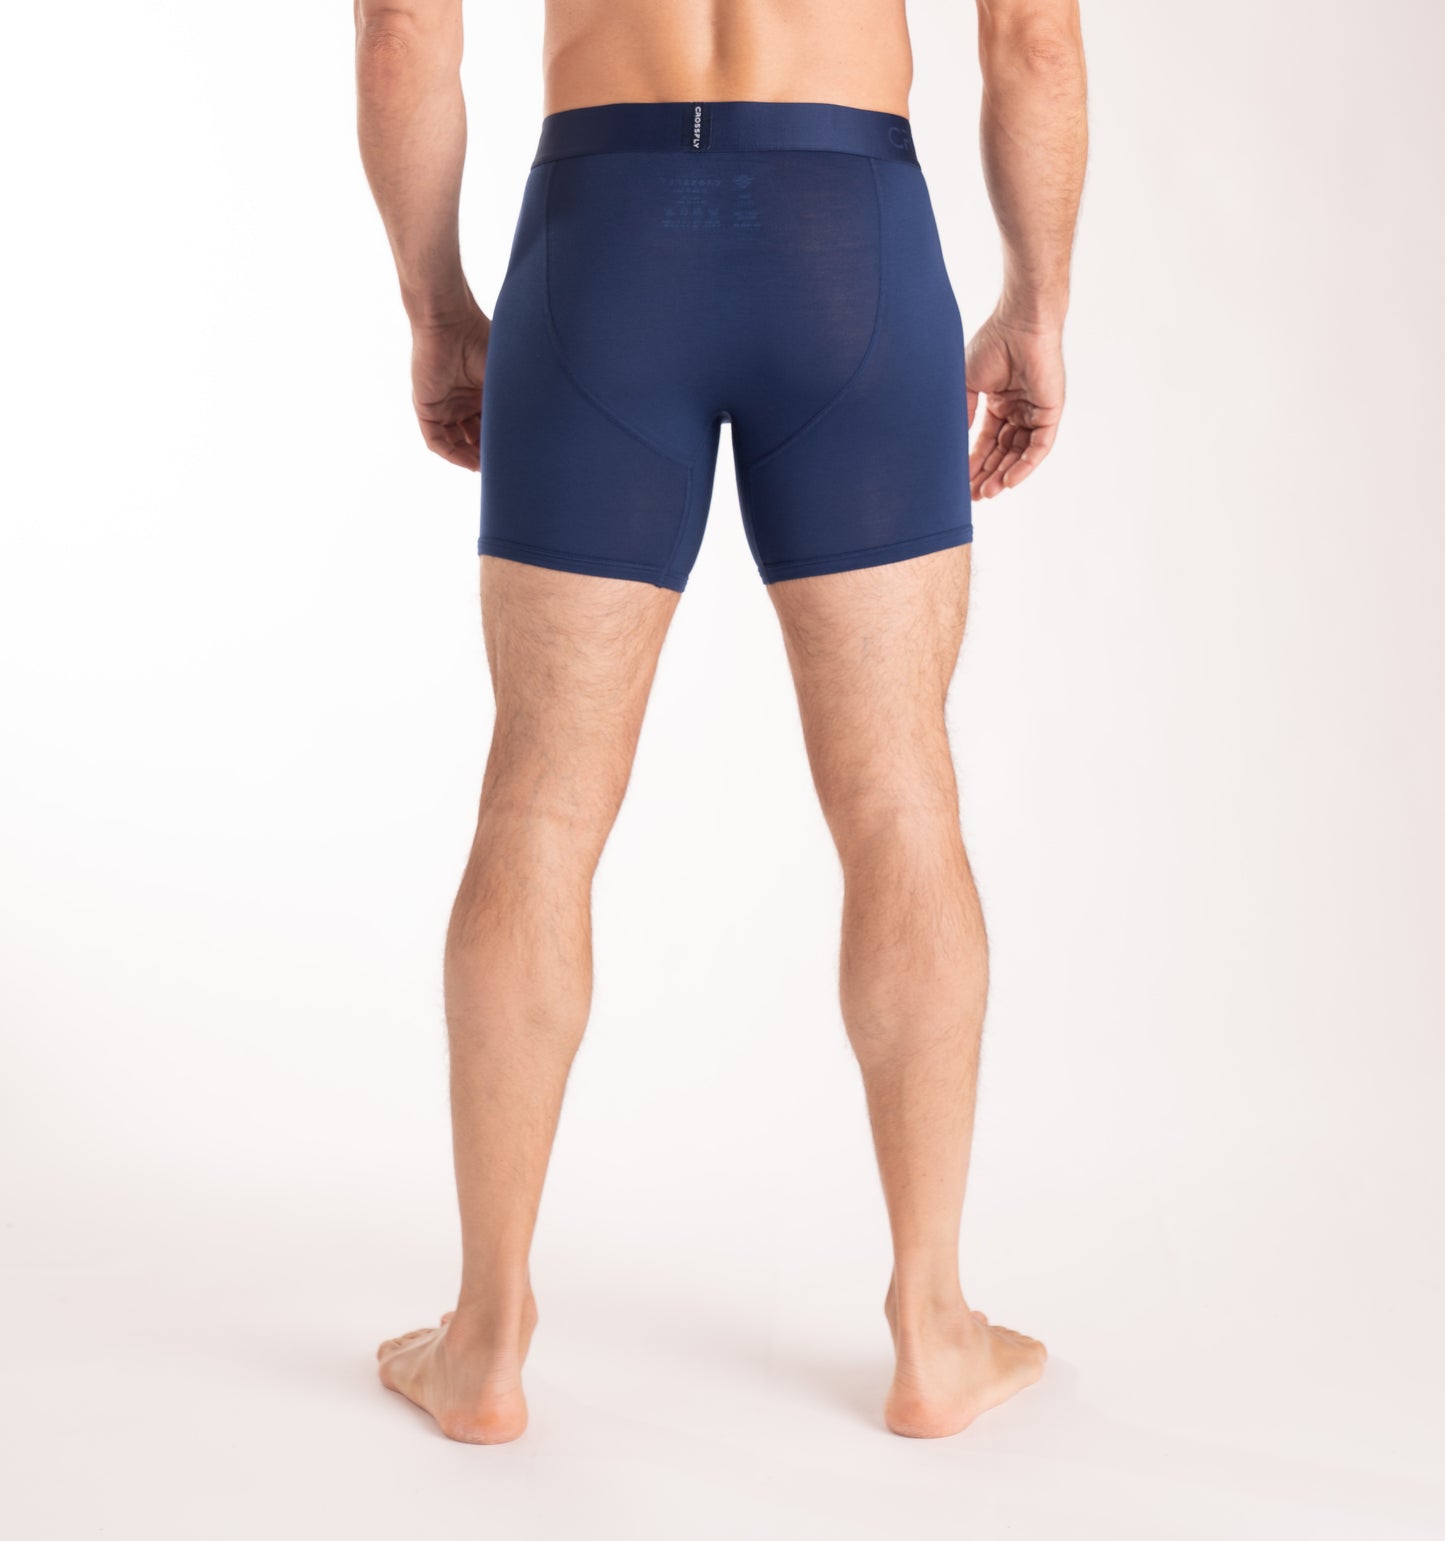 Crossfly men's IKON 6" navy boxers from the Everyday series, featuring X-Fly and Coccoon internal pocket support.